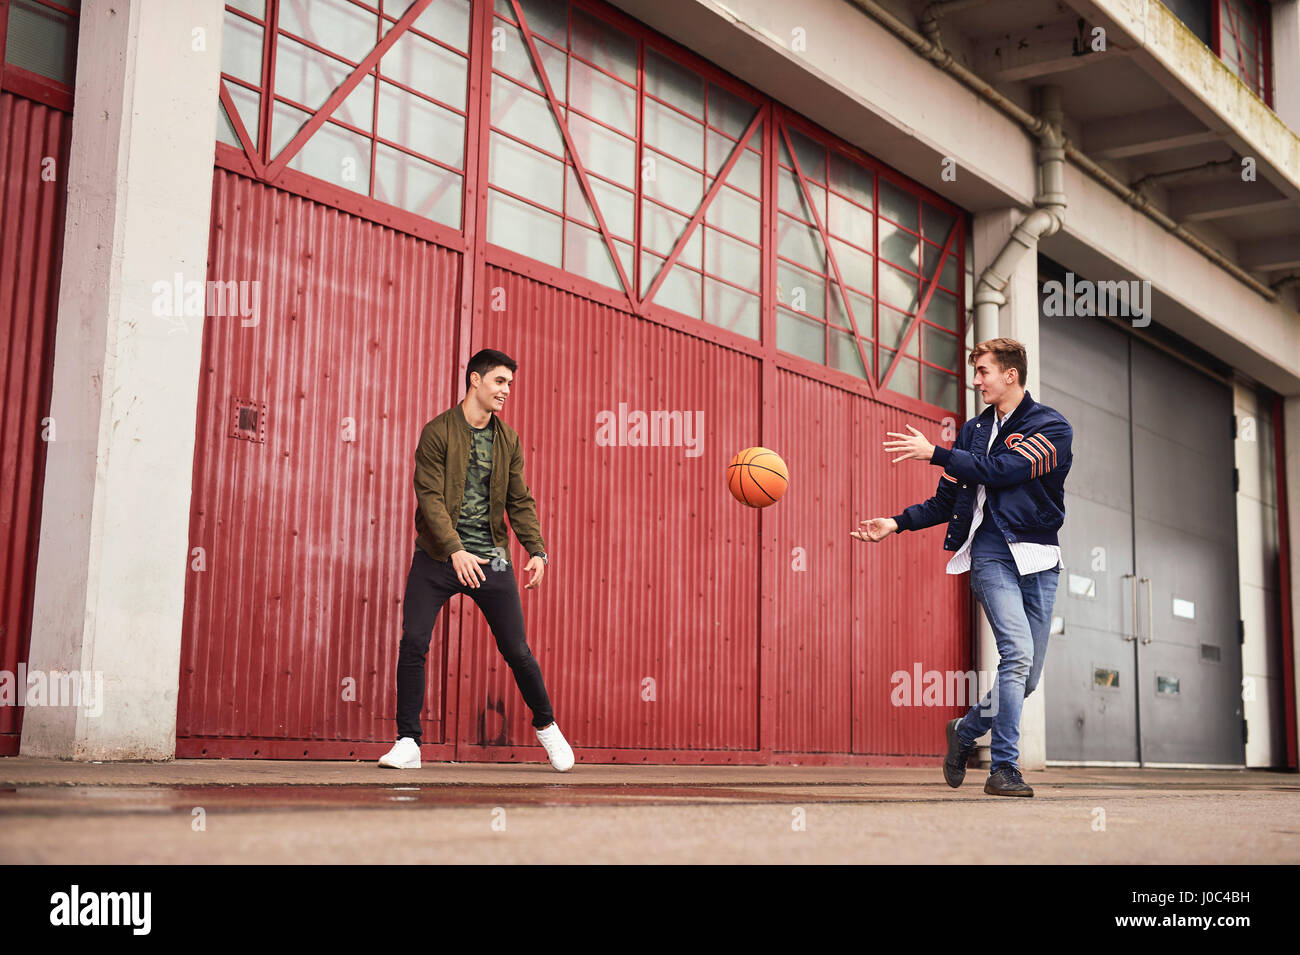 Two young men playing basketball in urban area, Bristol, UK Stock Photo